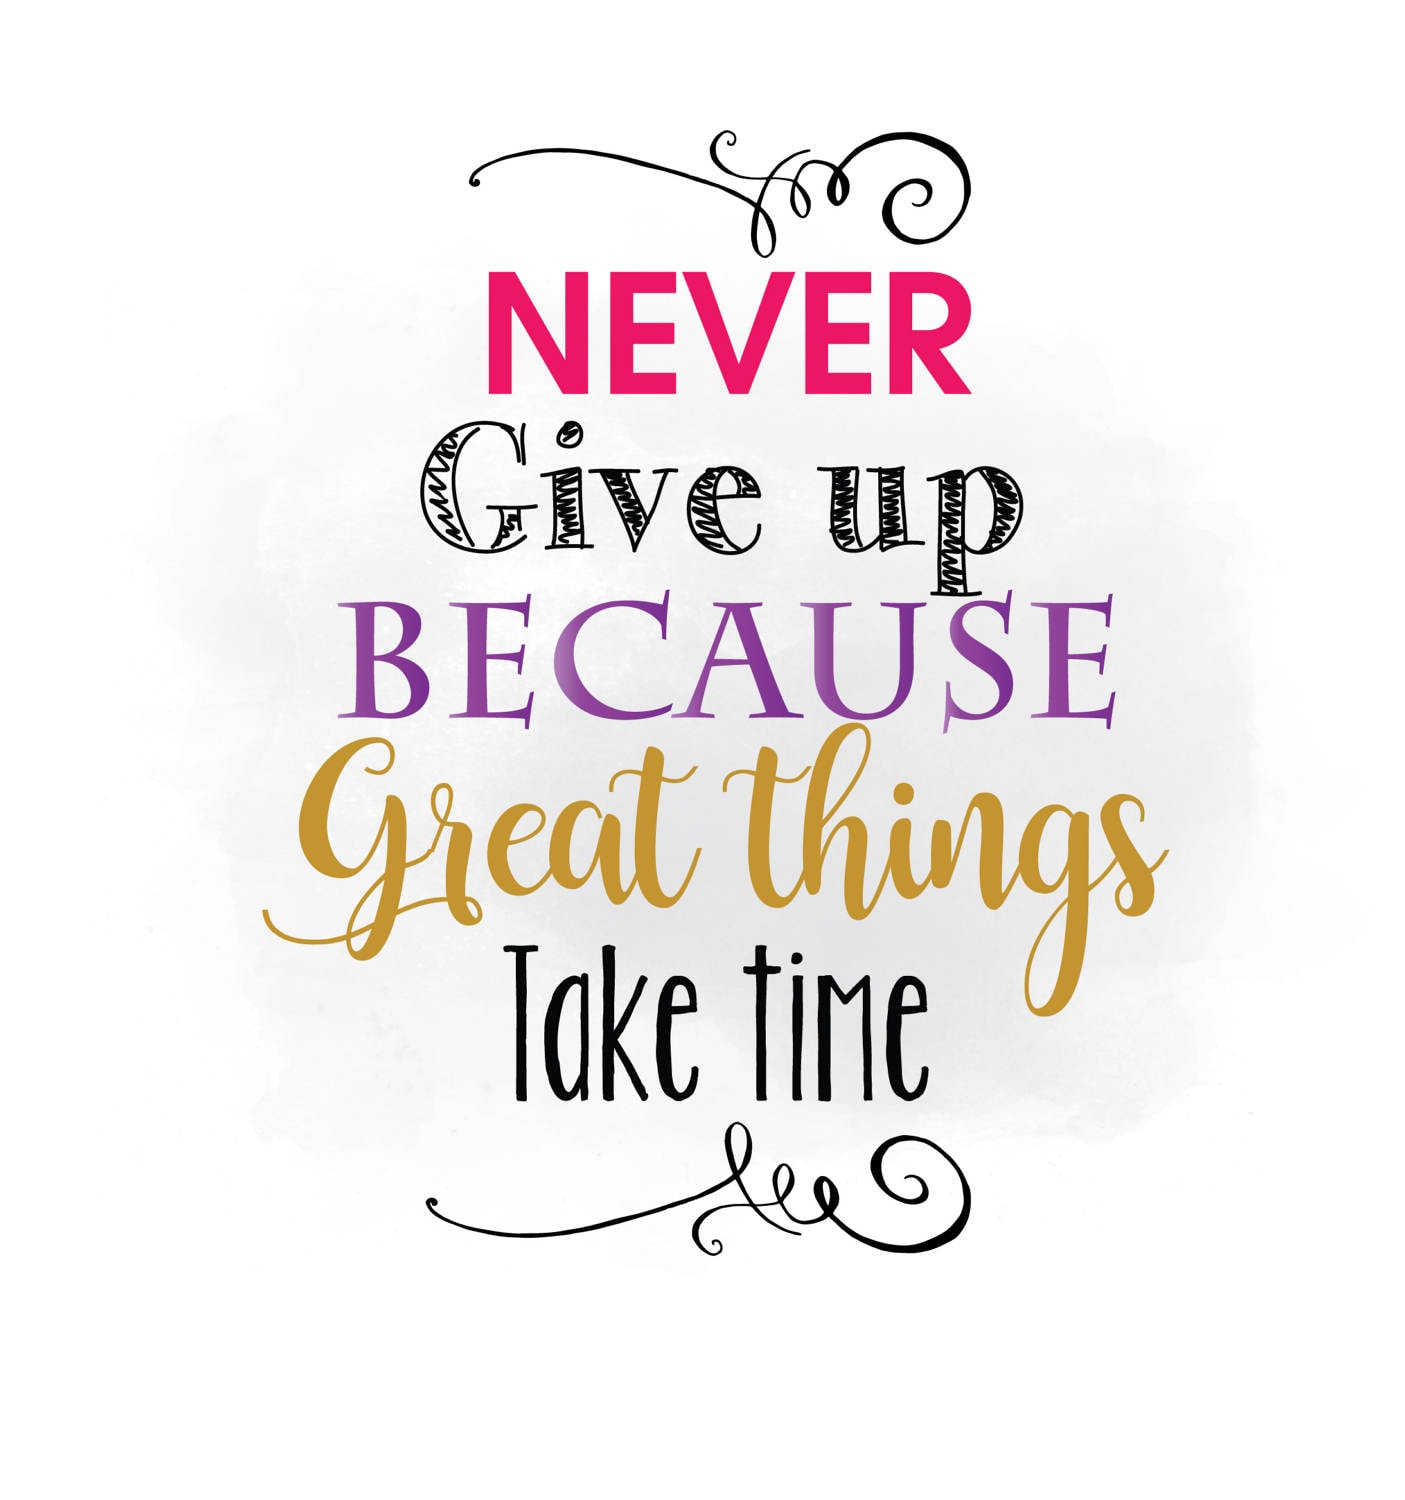 Download Never Give up SVG clipart, Inspirational Quote Word Art ...